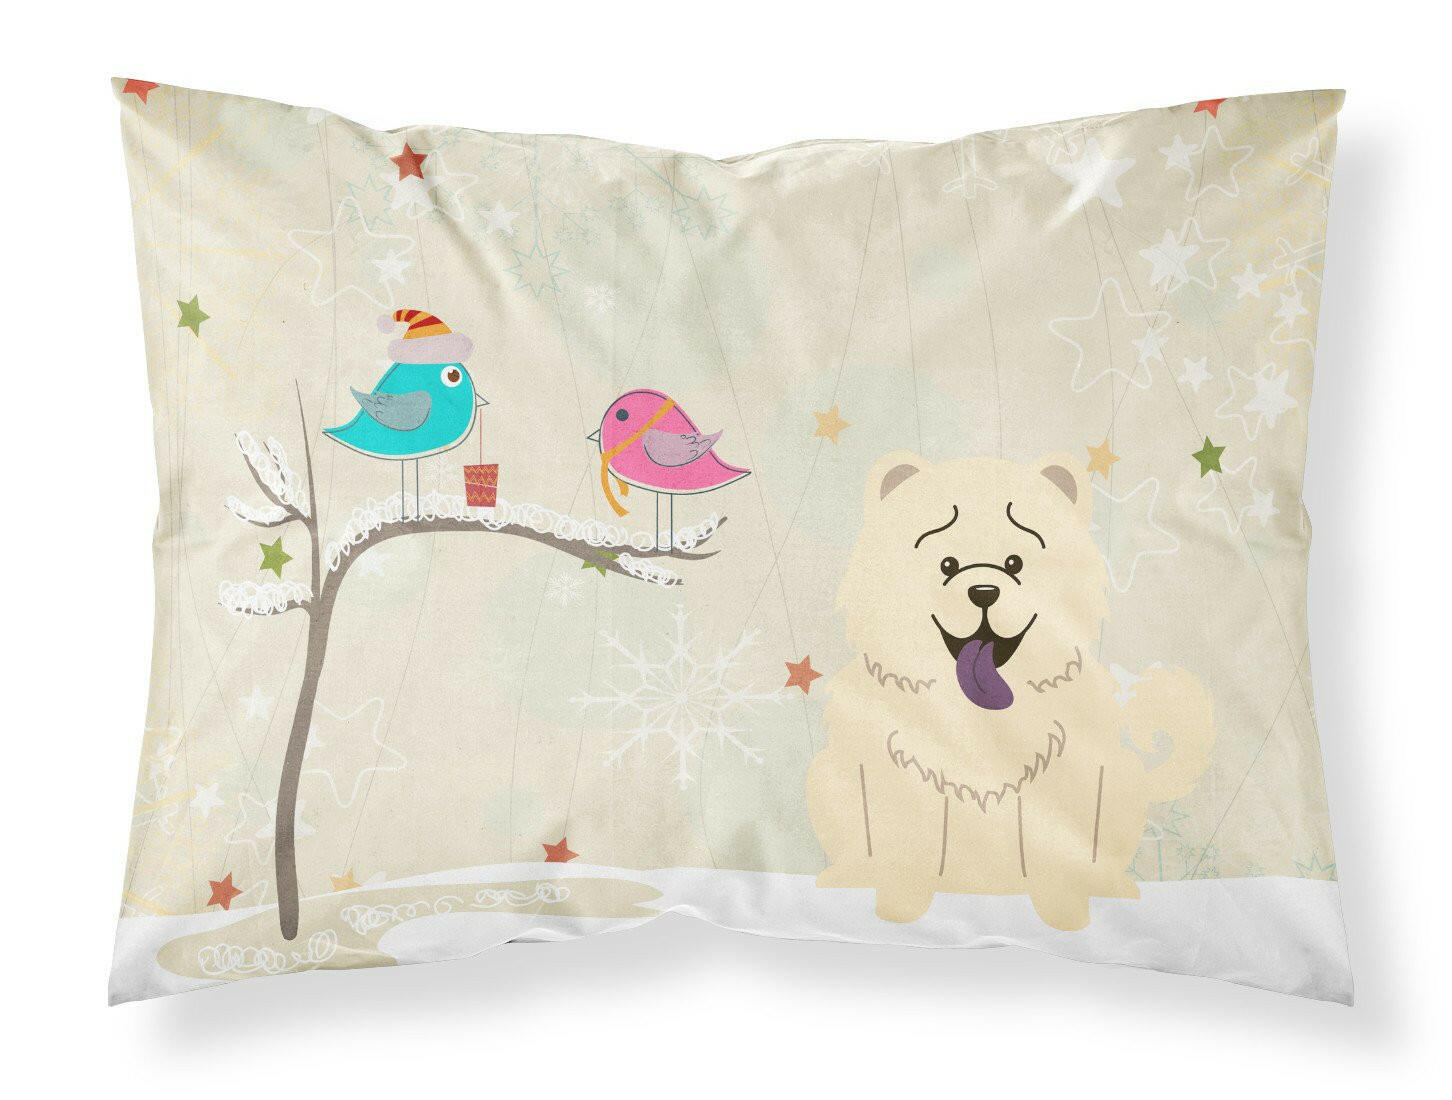 Christmas Presents between Friends Chow Chow White Fabric Standard Pillowcase BB2612PILLOWCASE by Caroline's Treasures